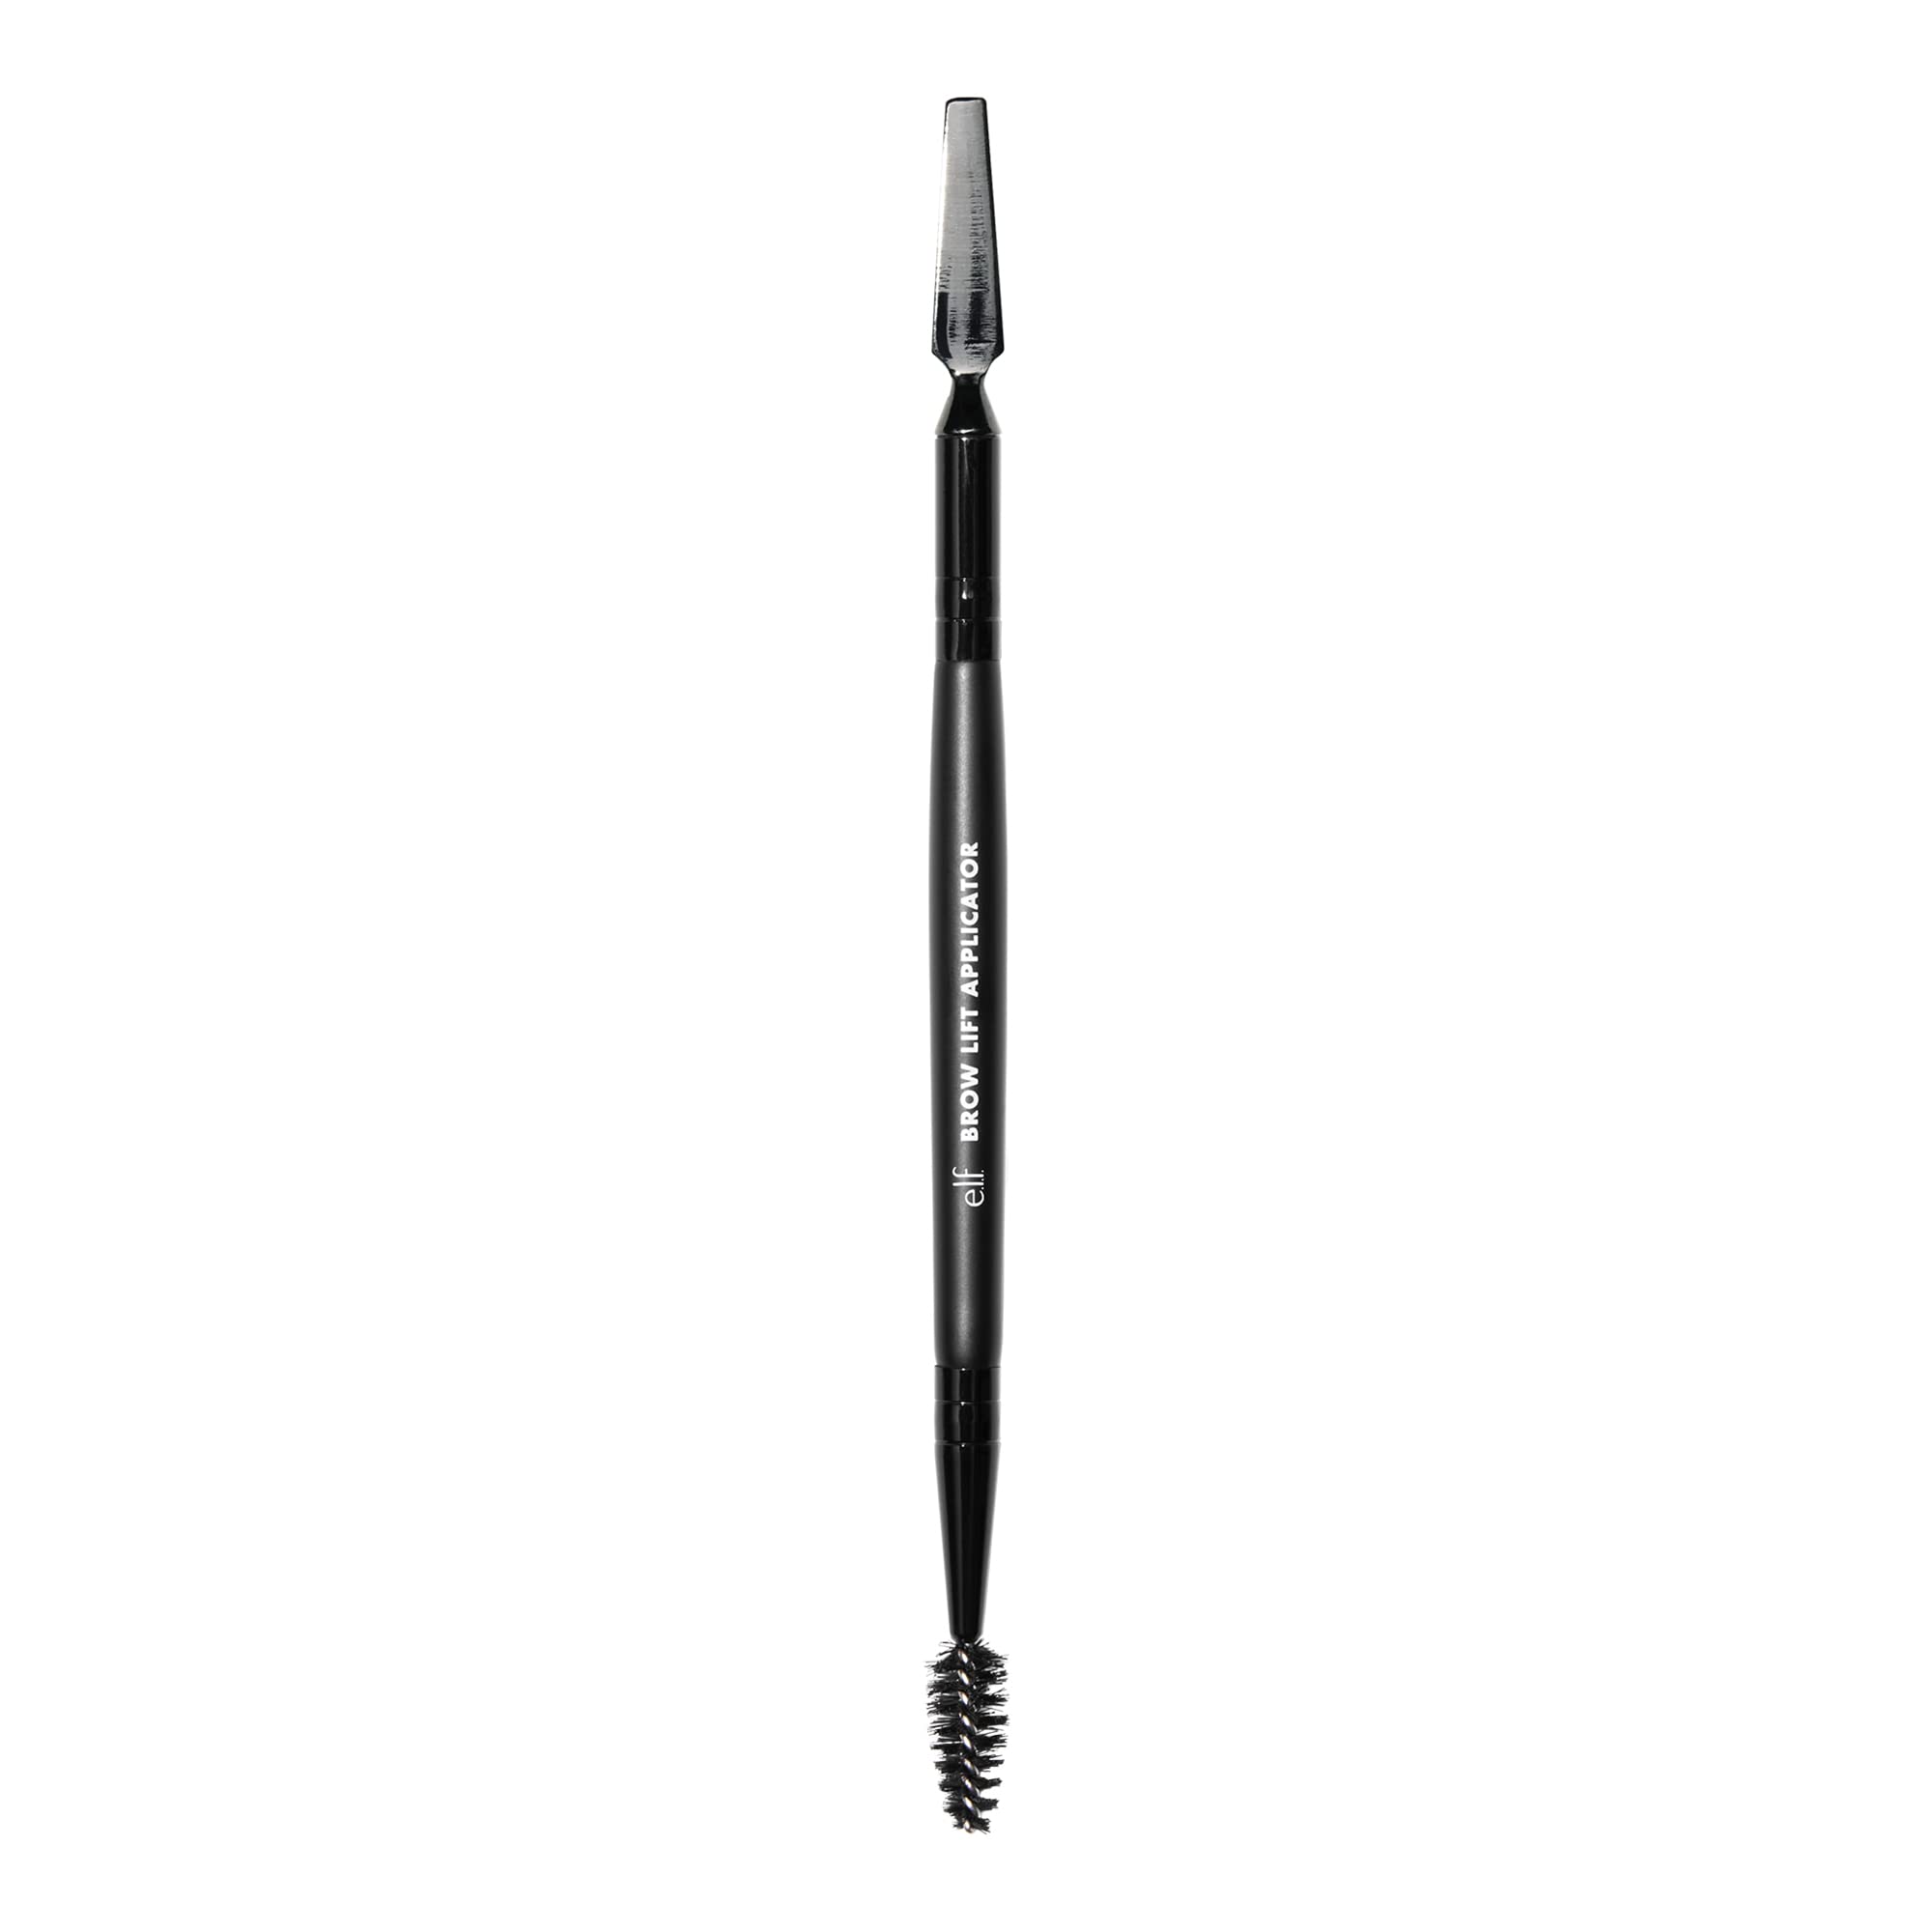 e.l.f. Cosmetics Brow Lift Applicator, Dual-Ended Eyebrow Brush For Grooming & Lifting Brows & Applying Brow Wax, Creates A Fluffy Feathered Look